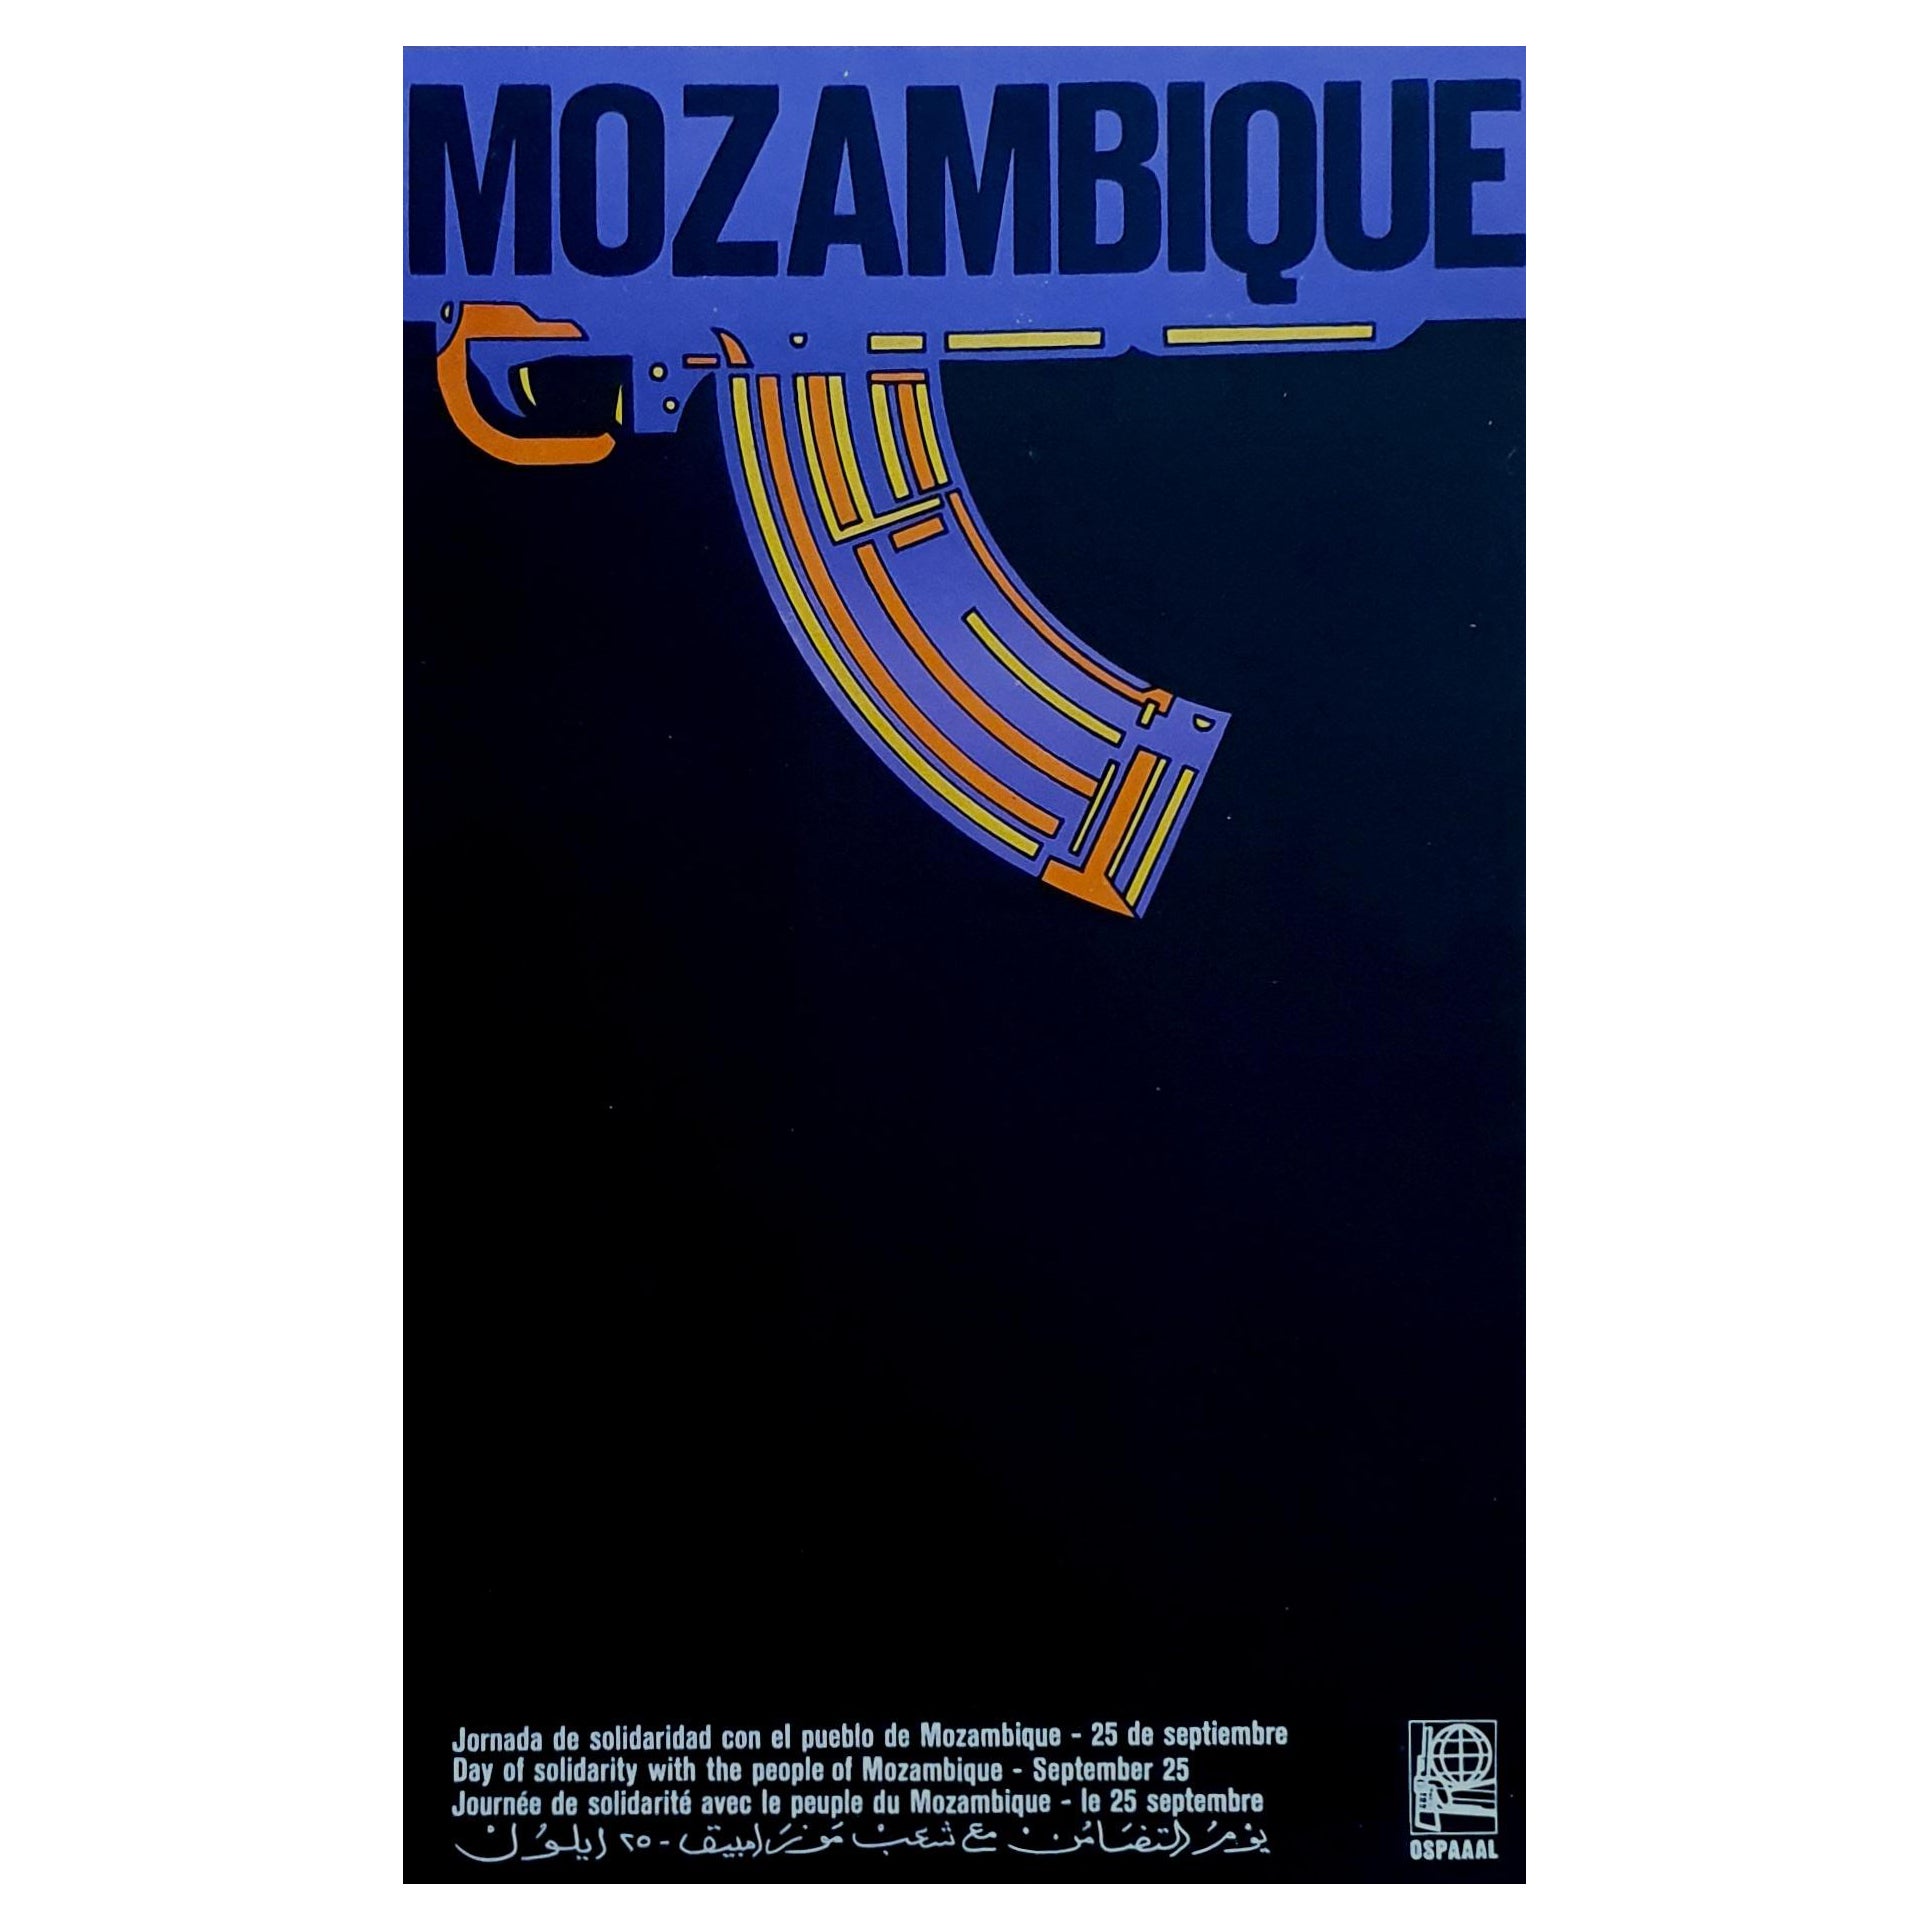 Original vintage opsaaal Mozambique poster 1969